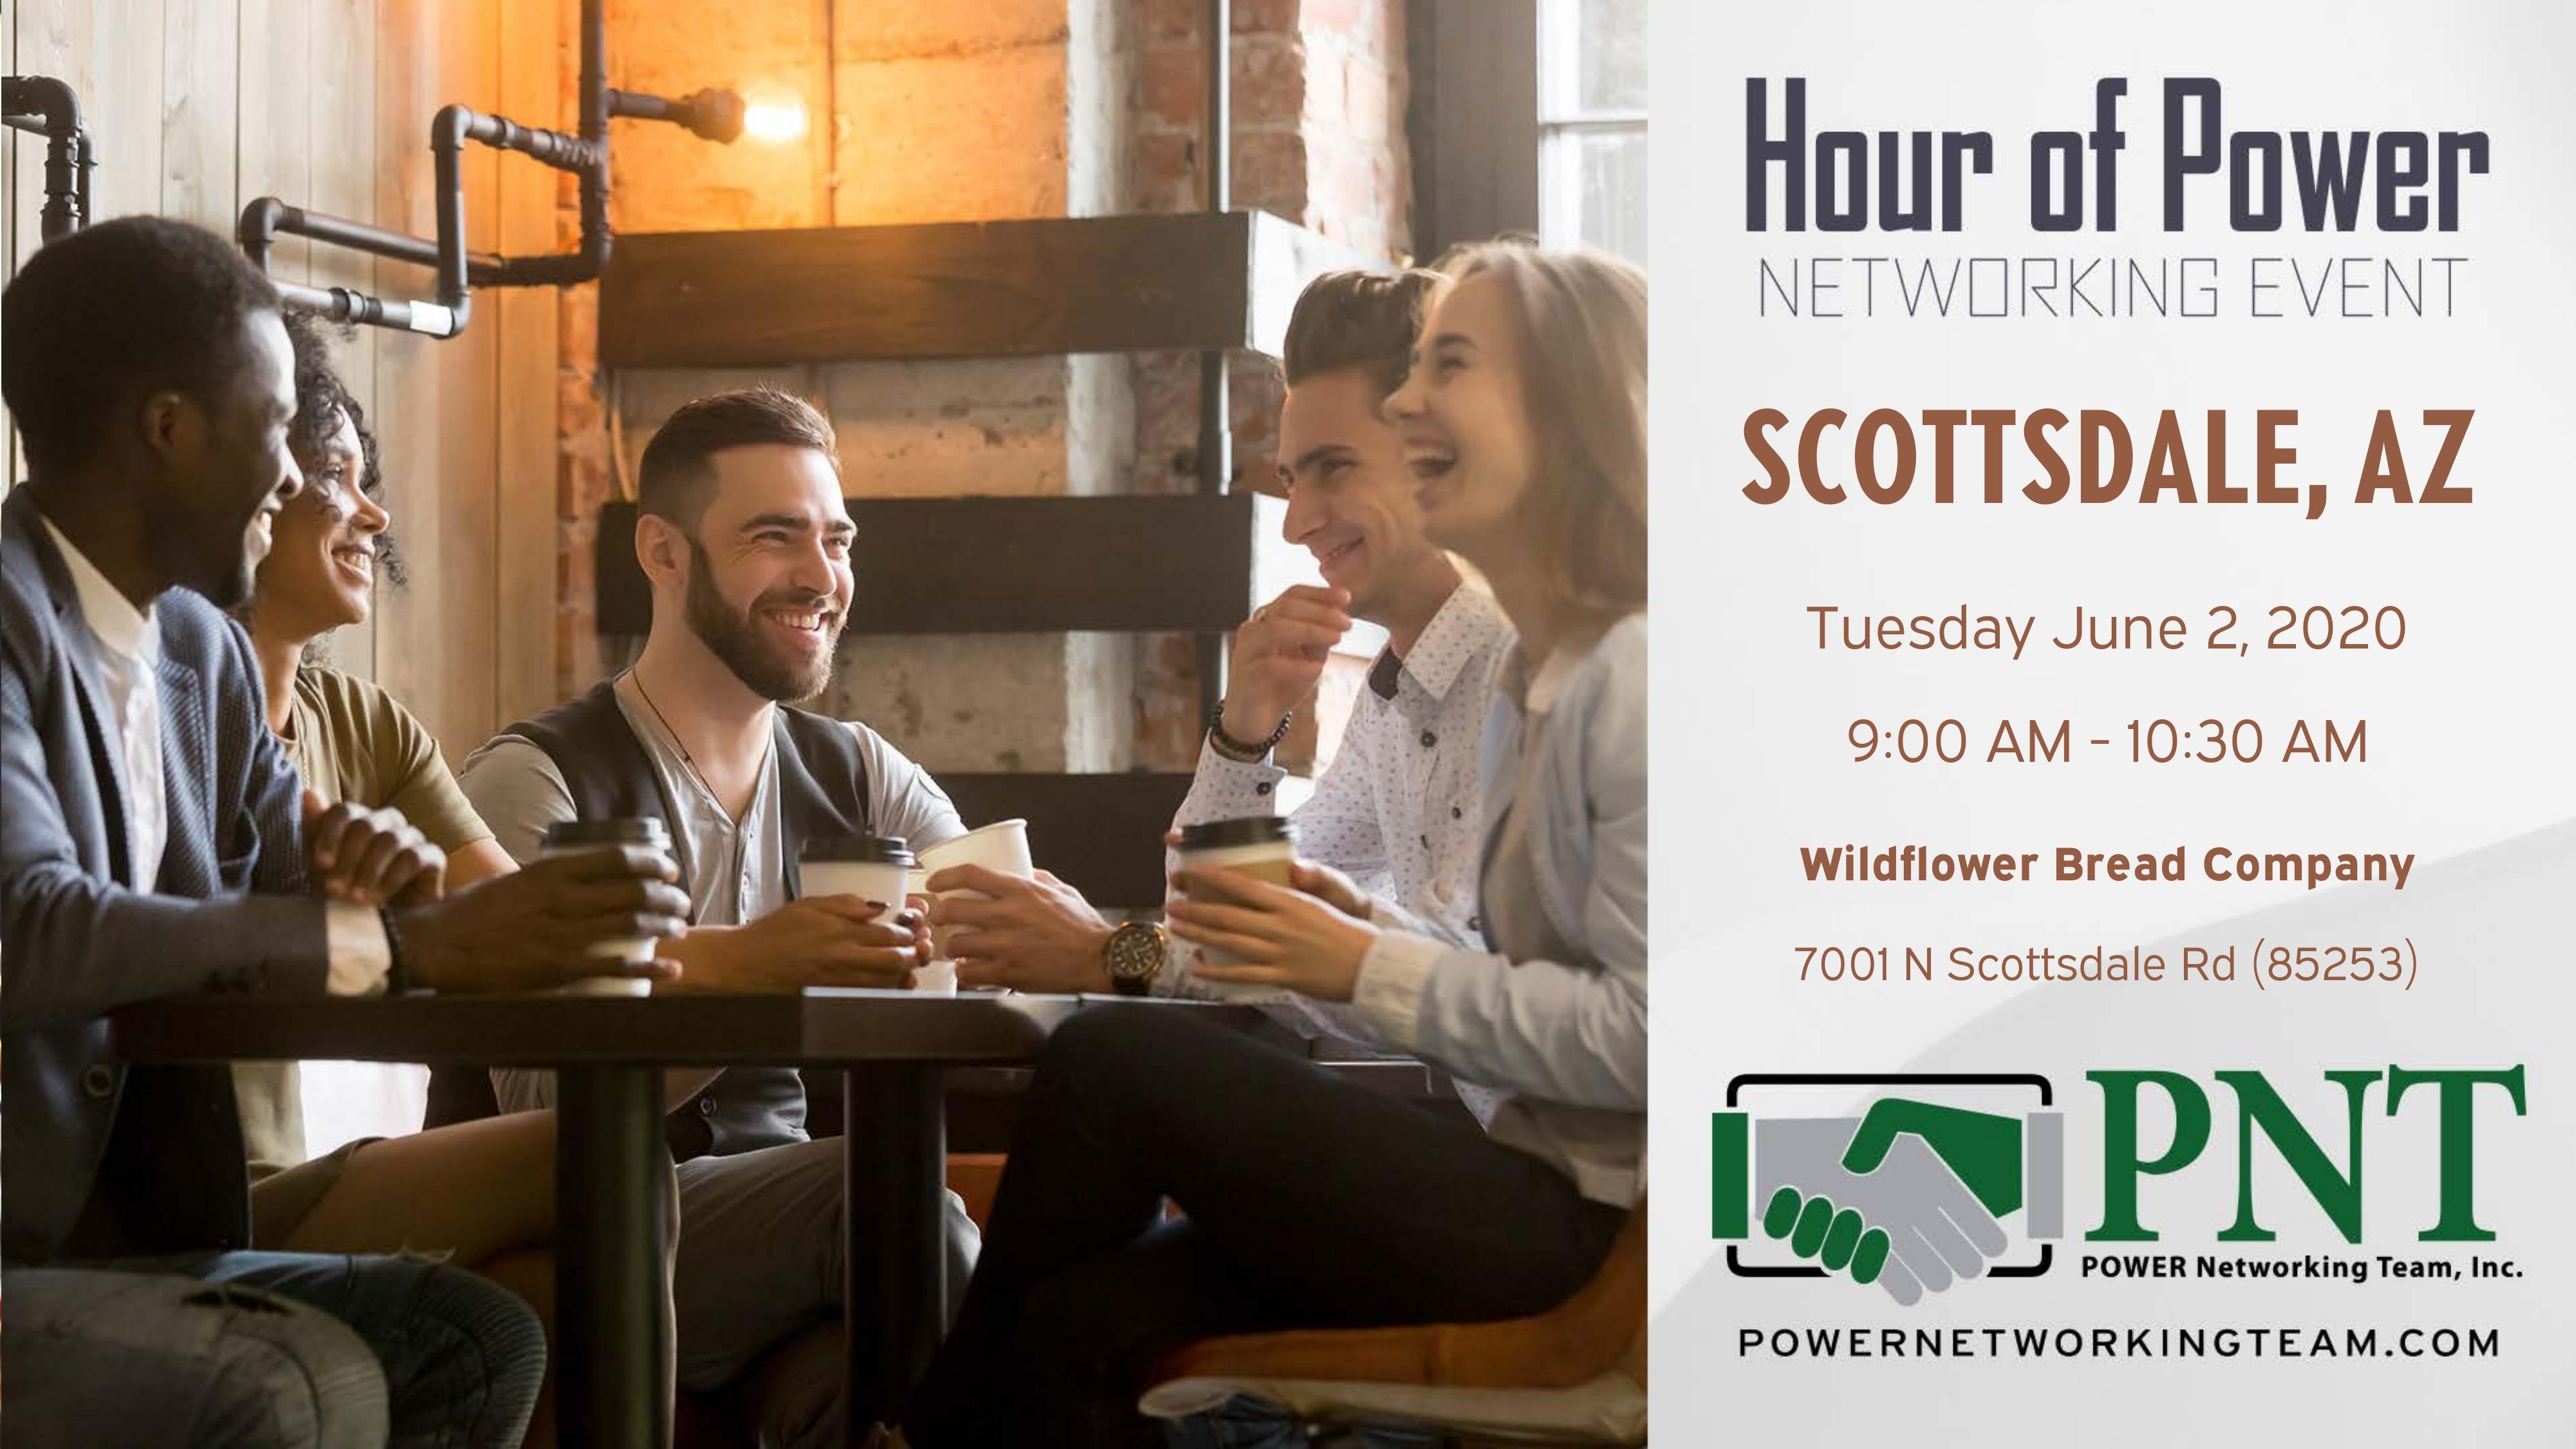 06/02/20 - PNT Scottsdale Central - Hour of Power Networking Event